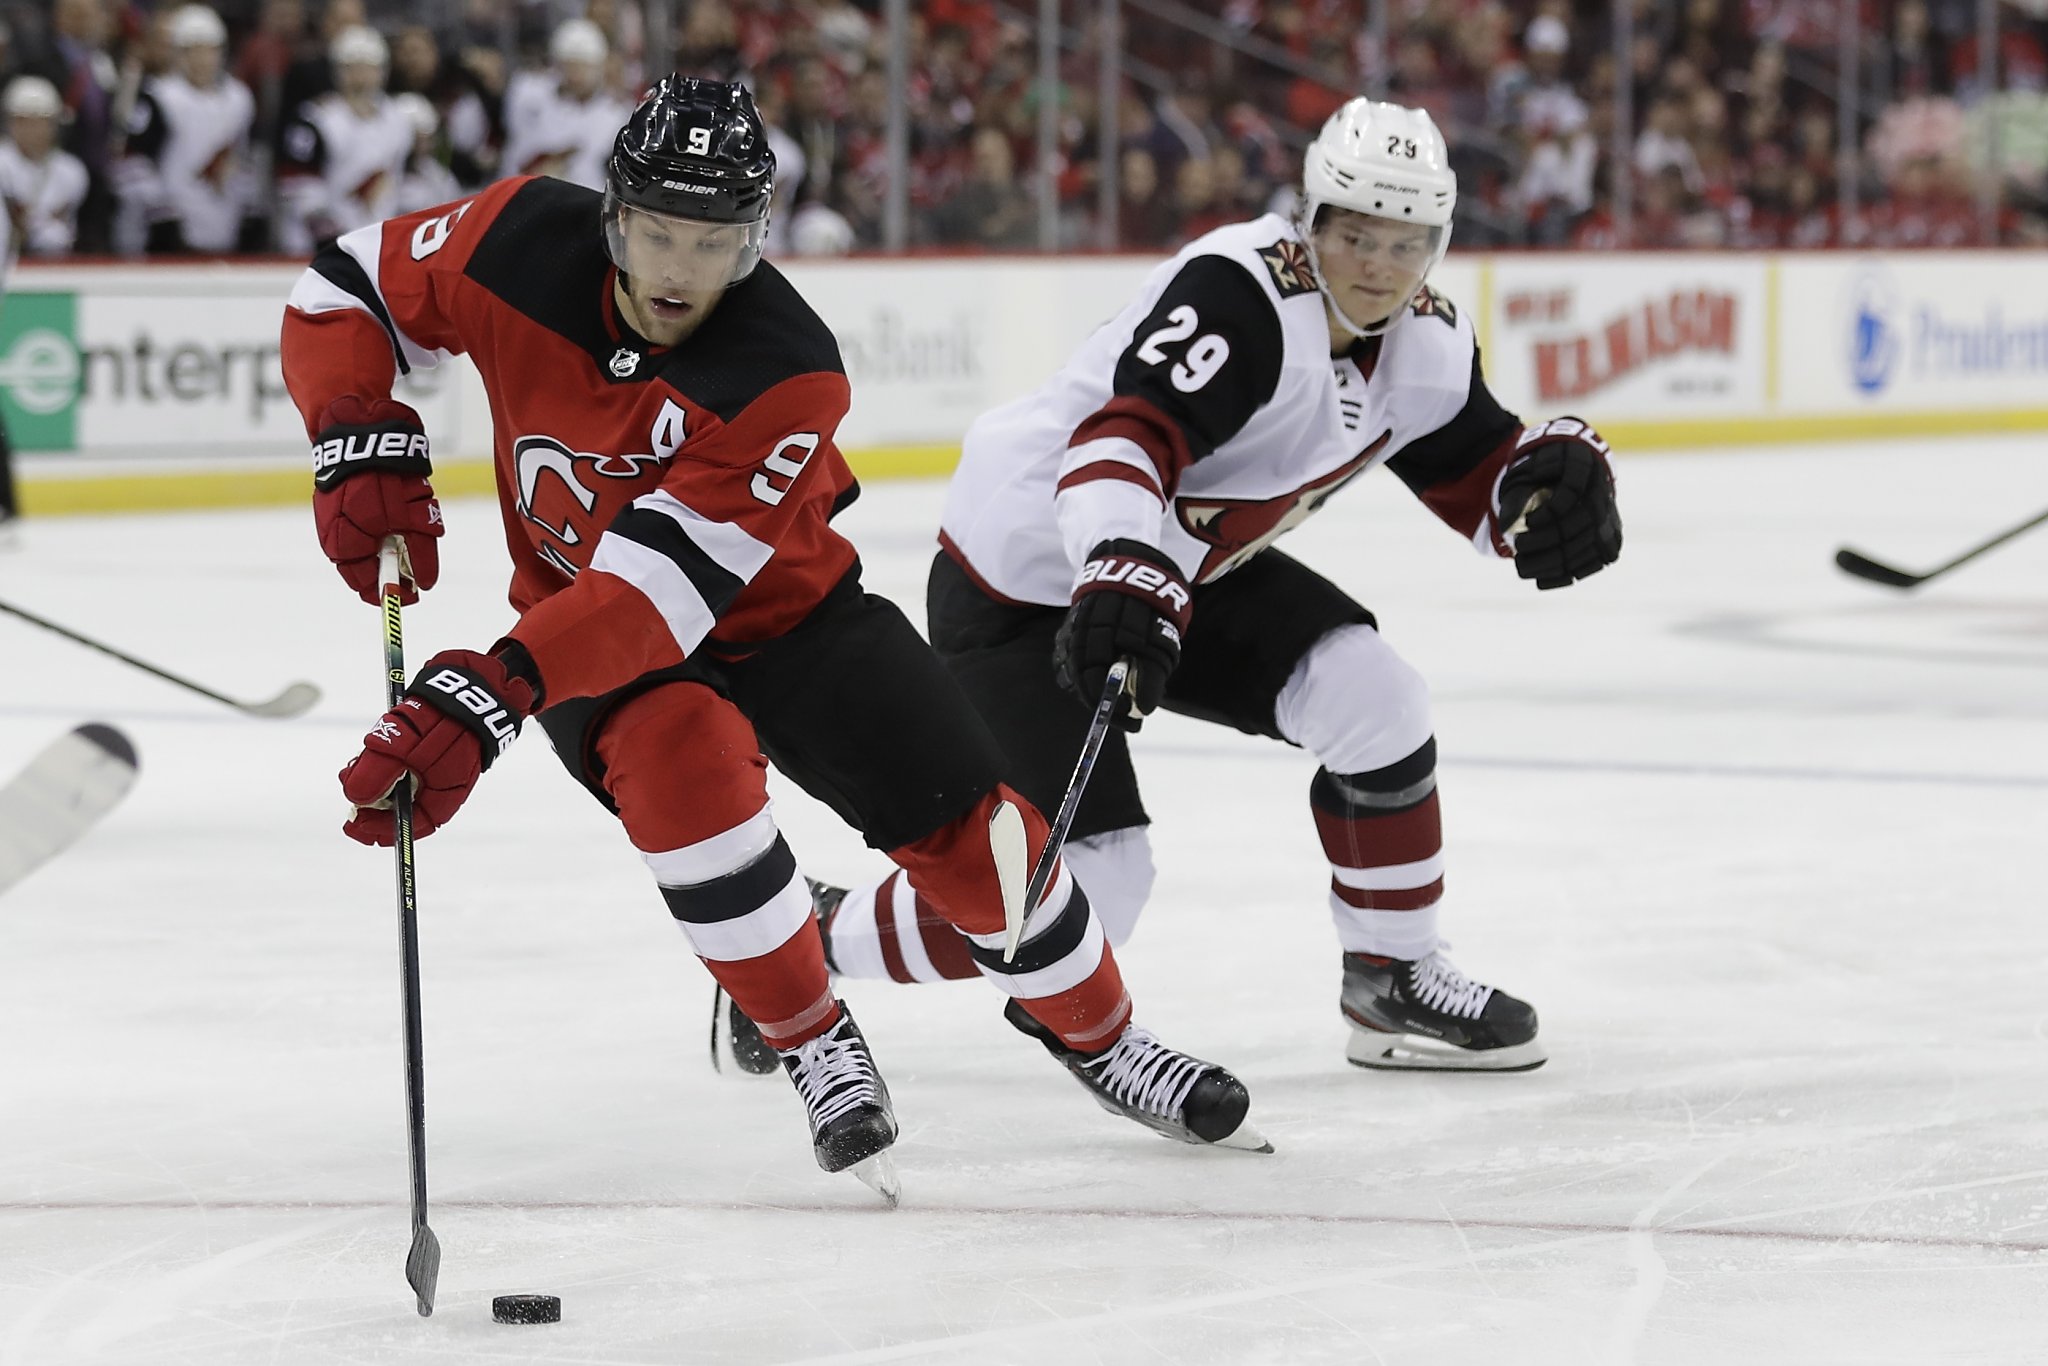 Canucks interested in trading for New Jersey Devils' Wayne Simmonds